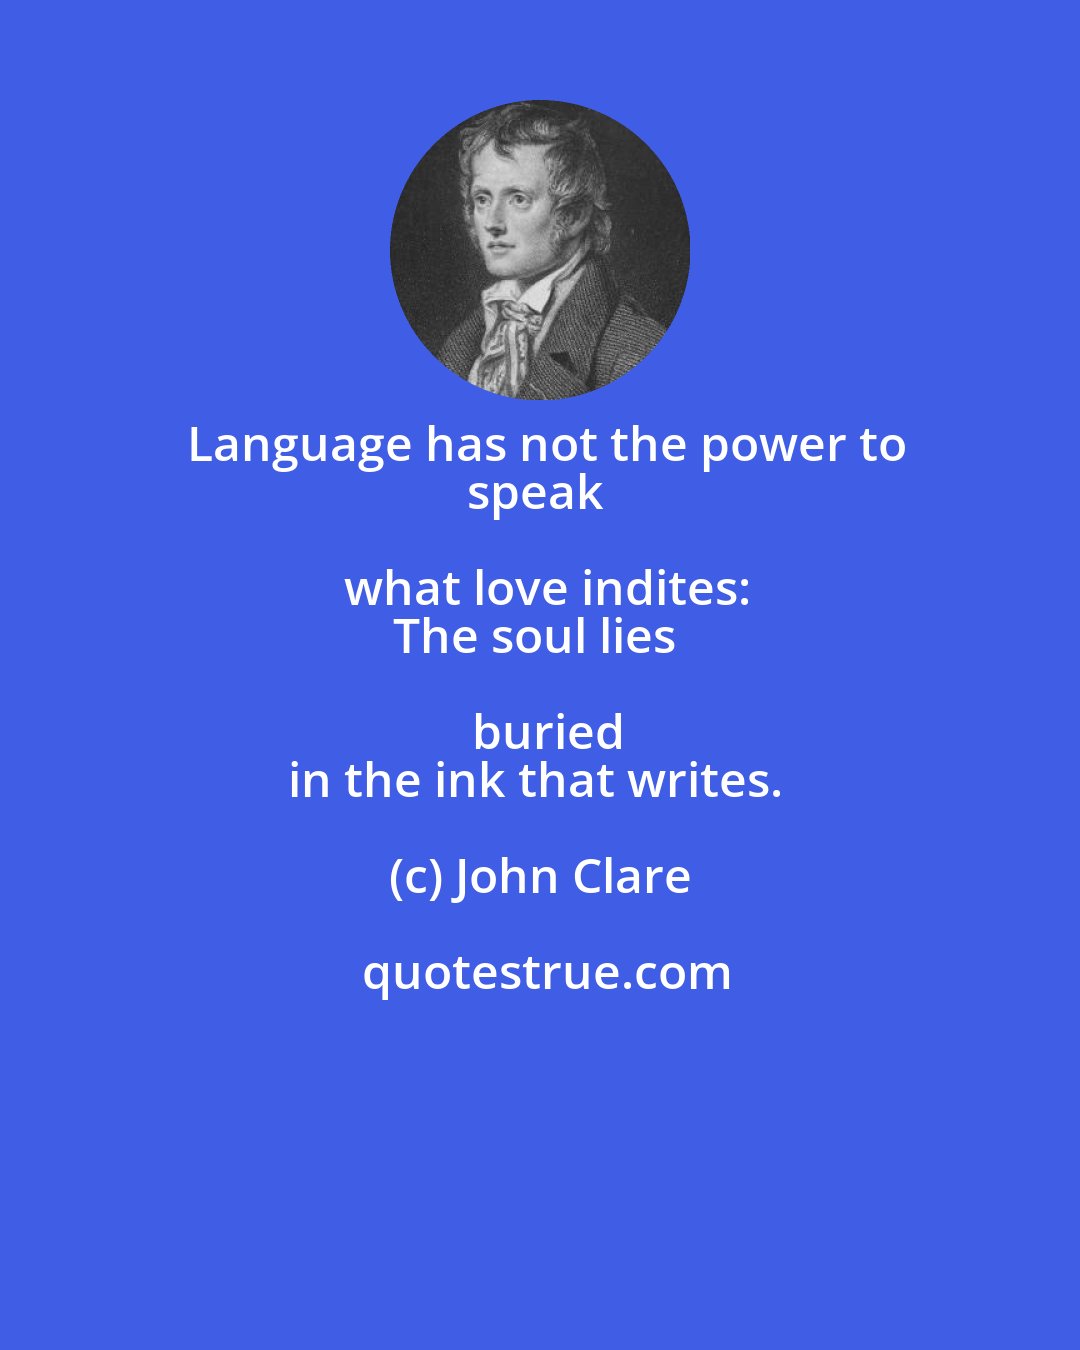 John Clare: Language has not the power to
speak what love indites:
The soul lies buried
in the ink that writes.